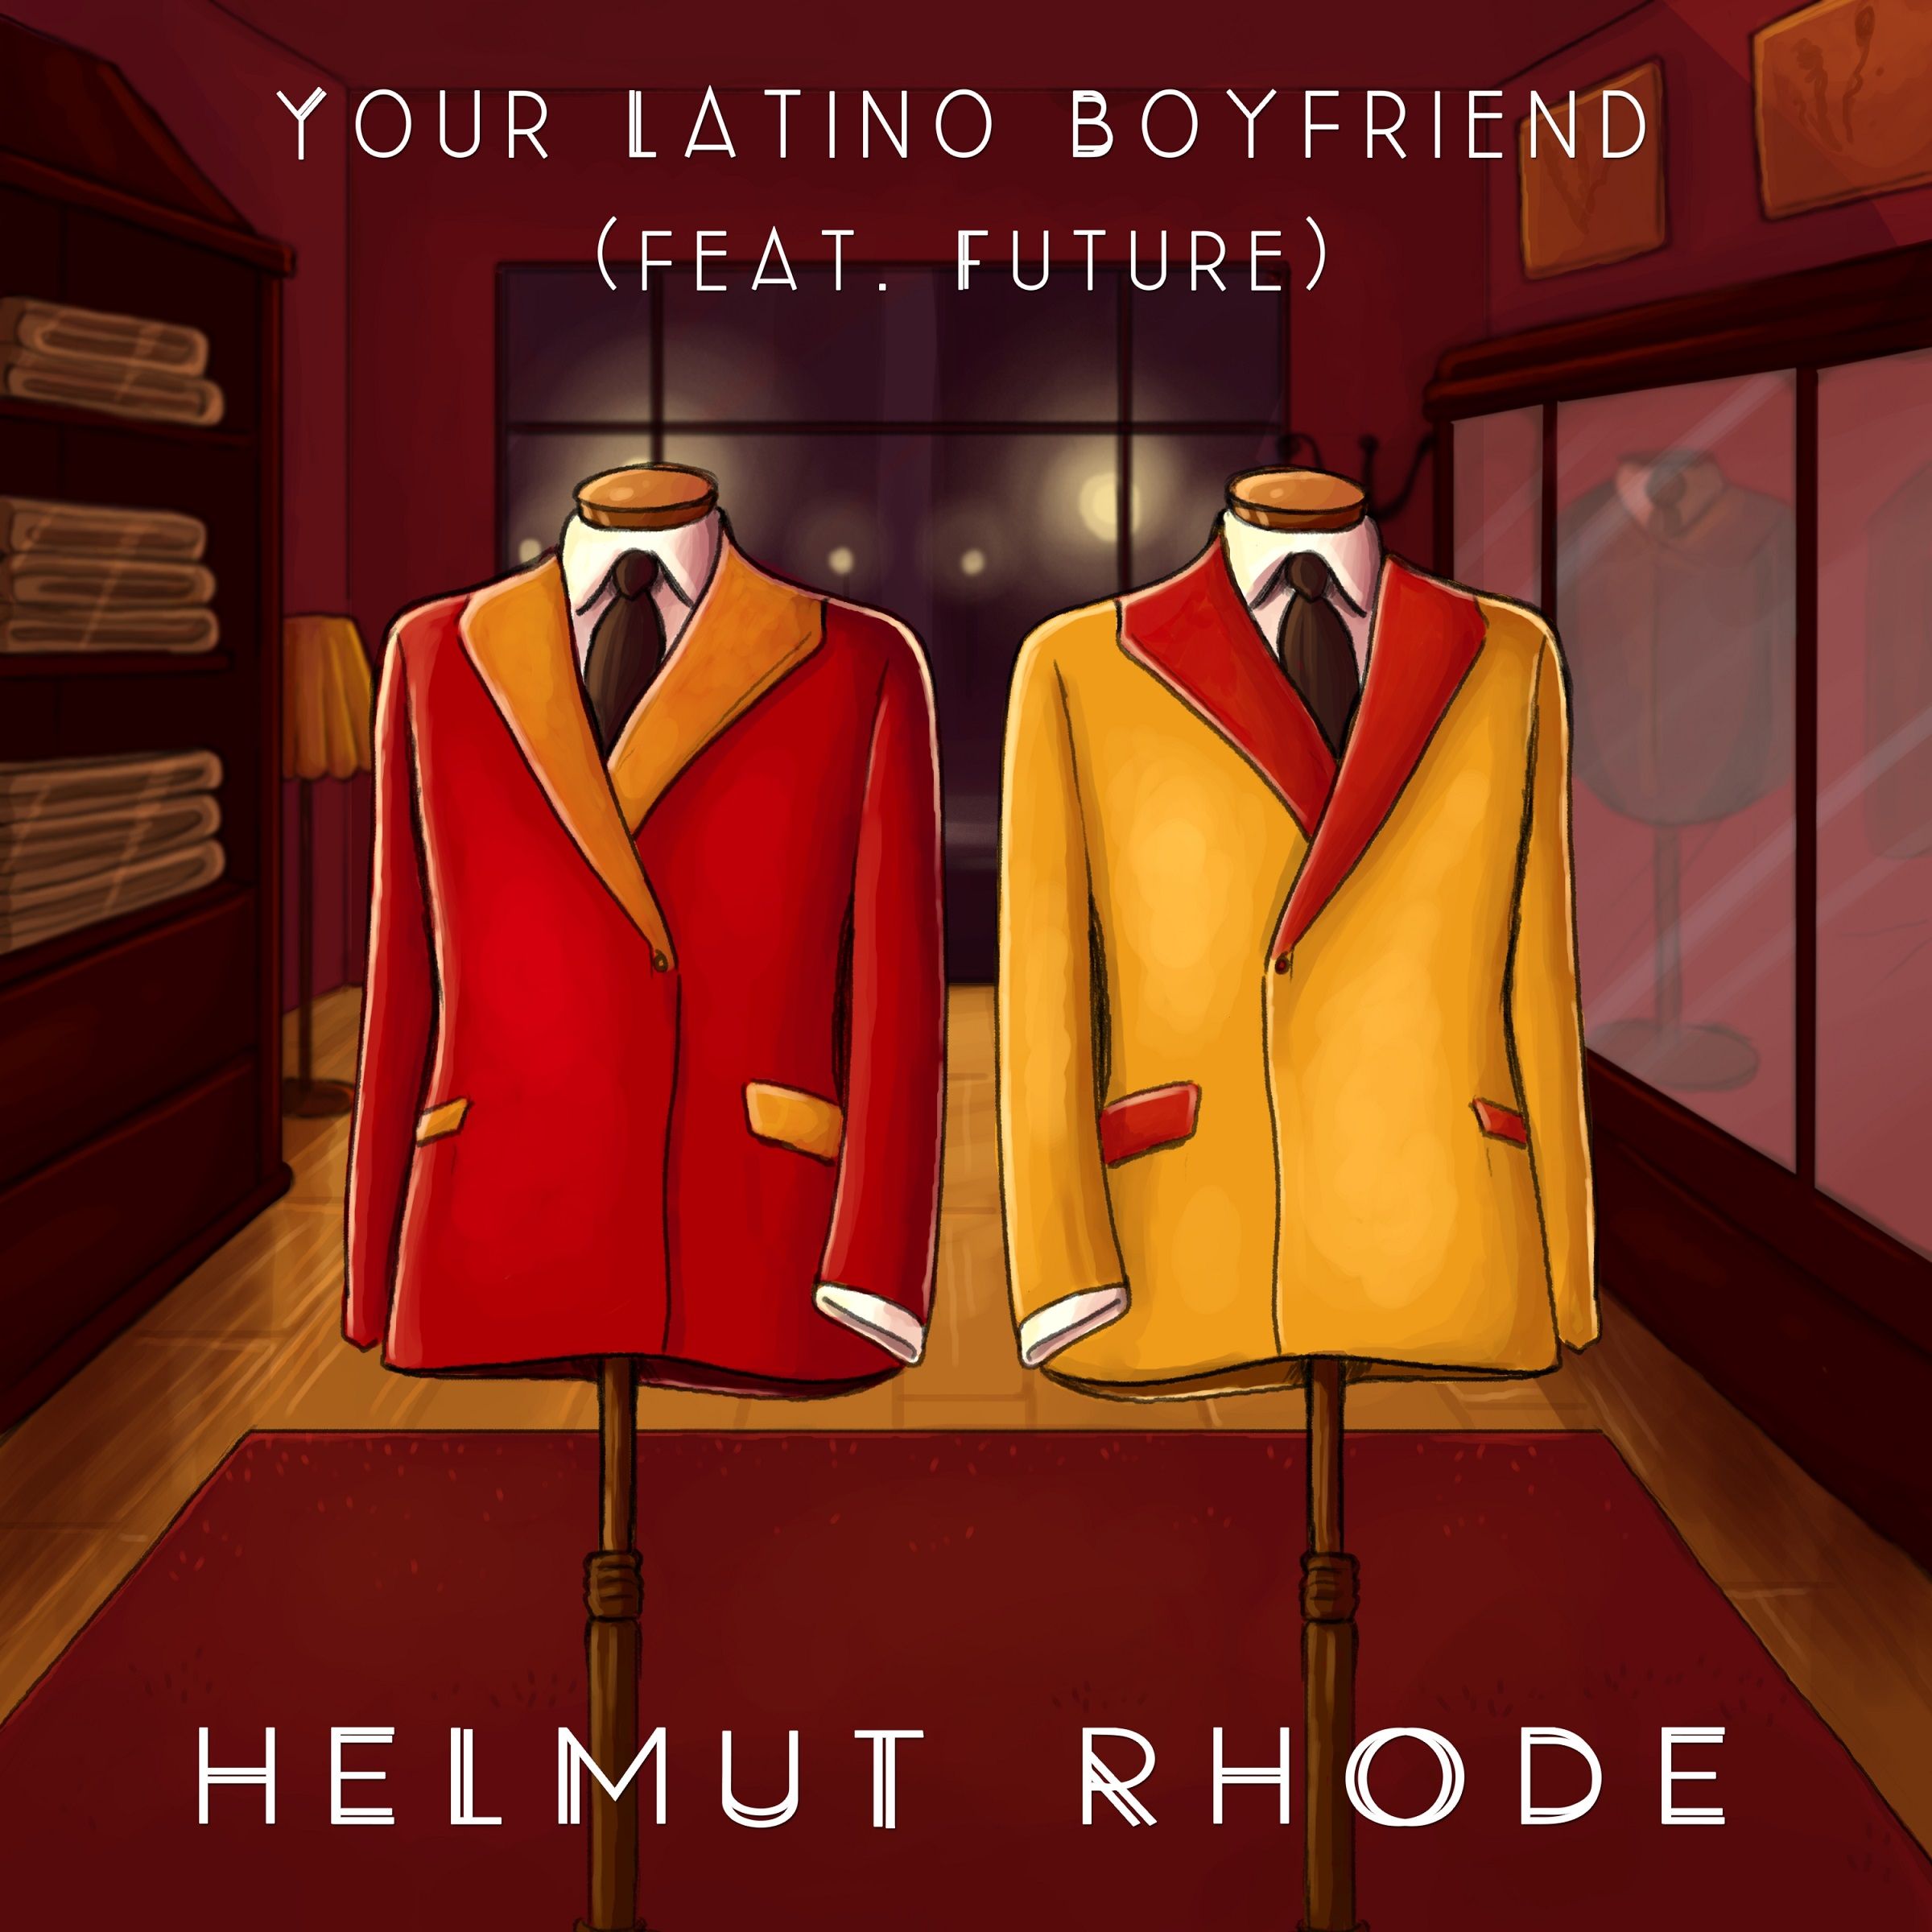 Art for Your Latino Boyfriend by Helmut Rhode feat. Future